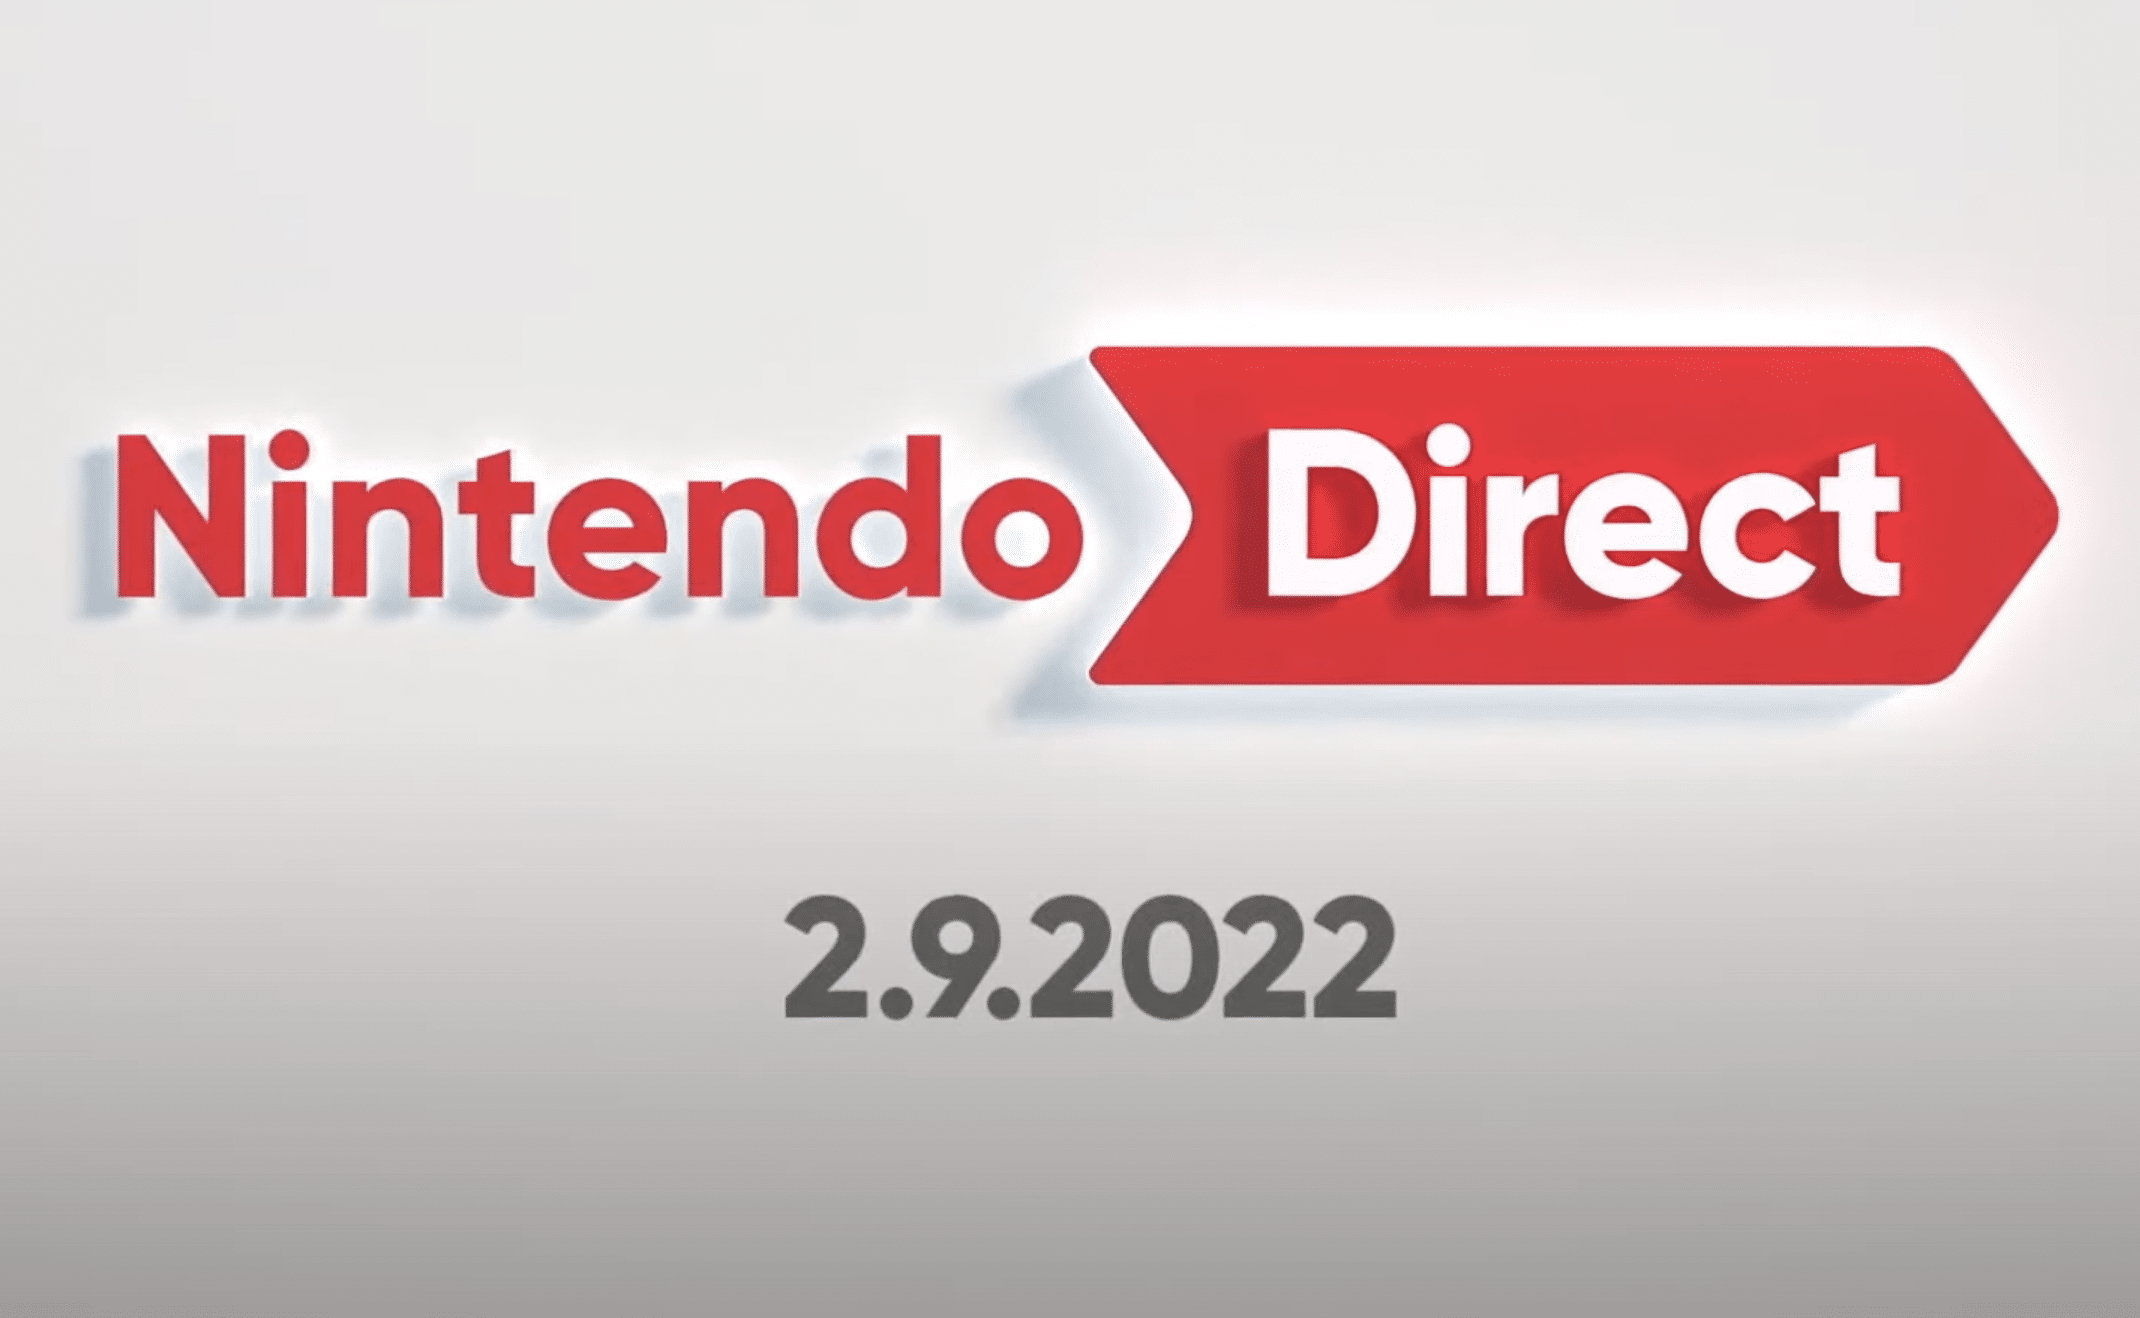 Nintendo Direct is full of surprises but misses the mark Eggplante!